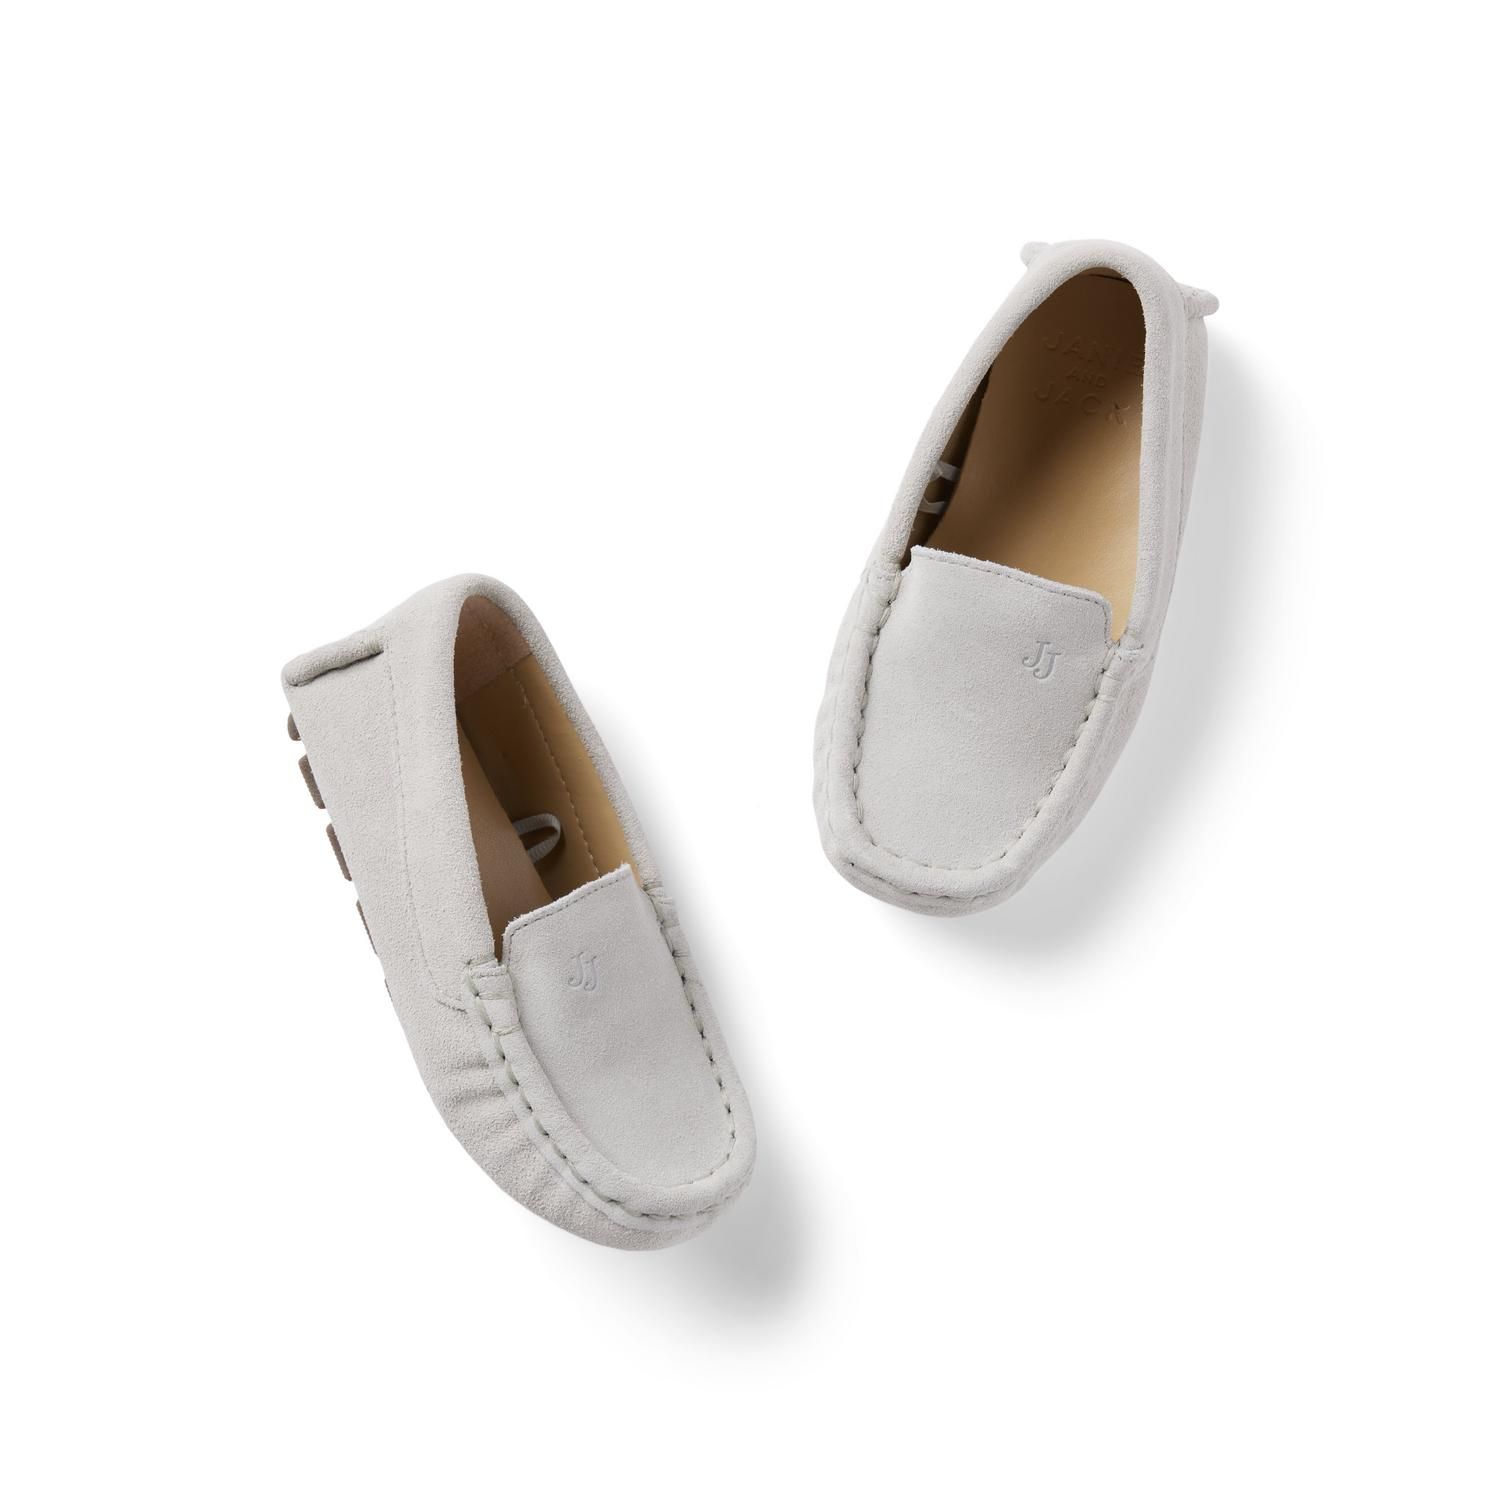 Suede Driving Shoe | Janie and Jack